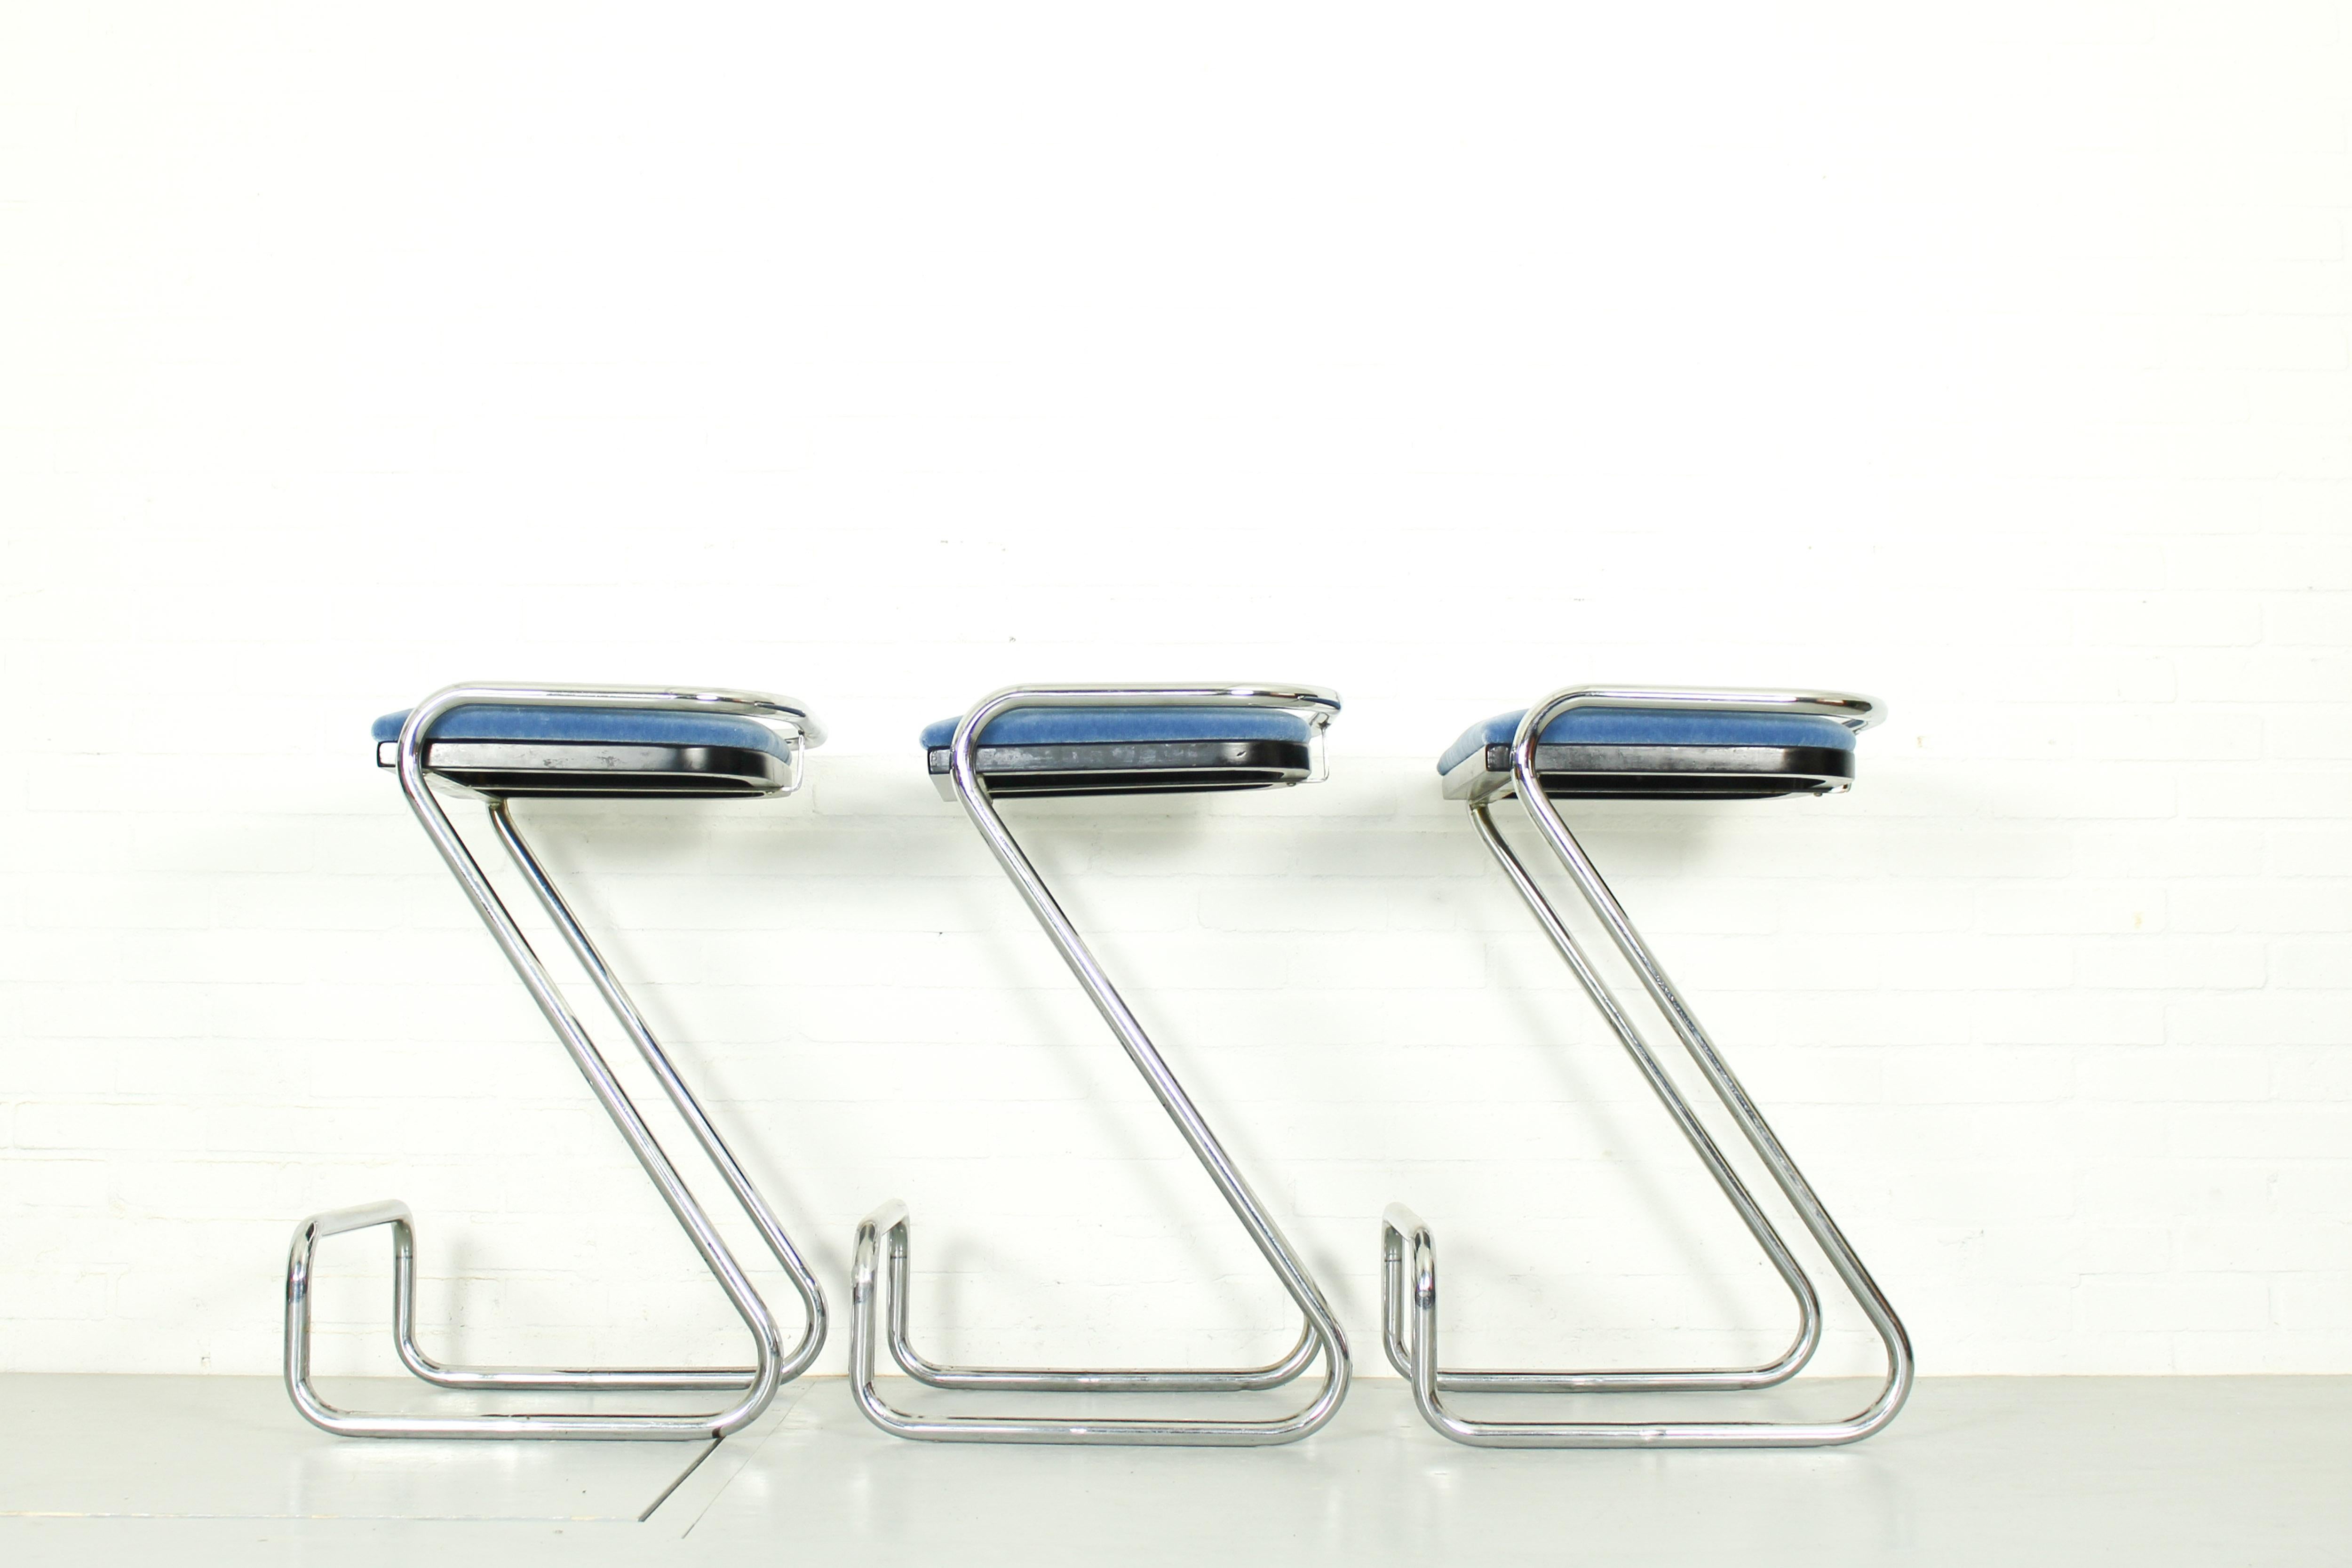 In the style of Charlotte Perriand, a set of 3 Minimalist chromed steel tube bar stools. Z form with elevated footrest rail. Lightblue mohair fabric upholstered seating. Signed 